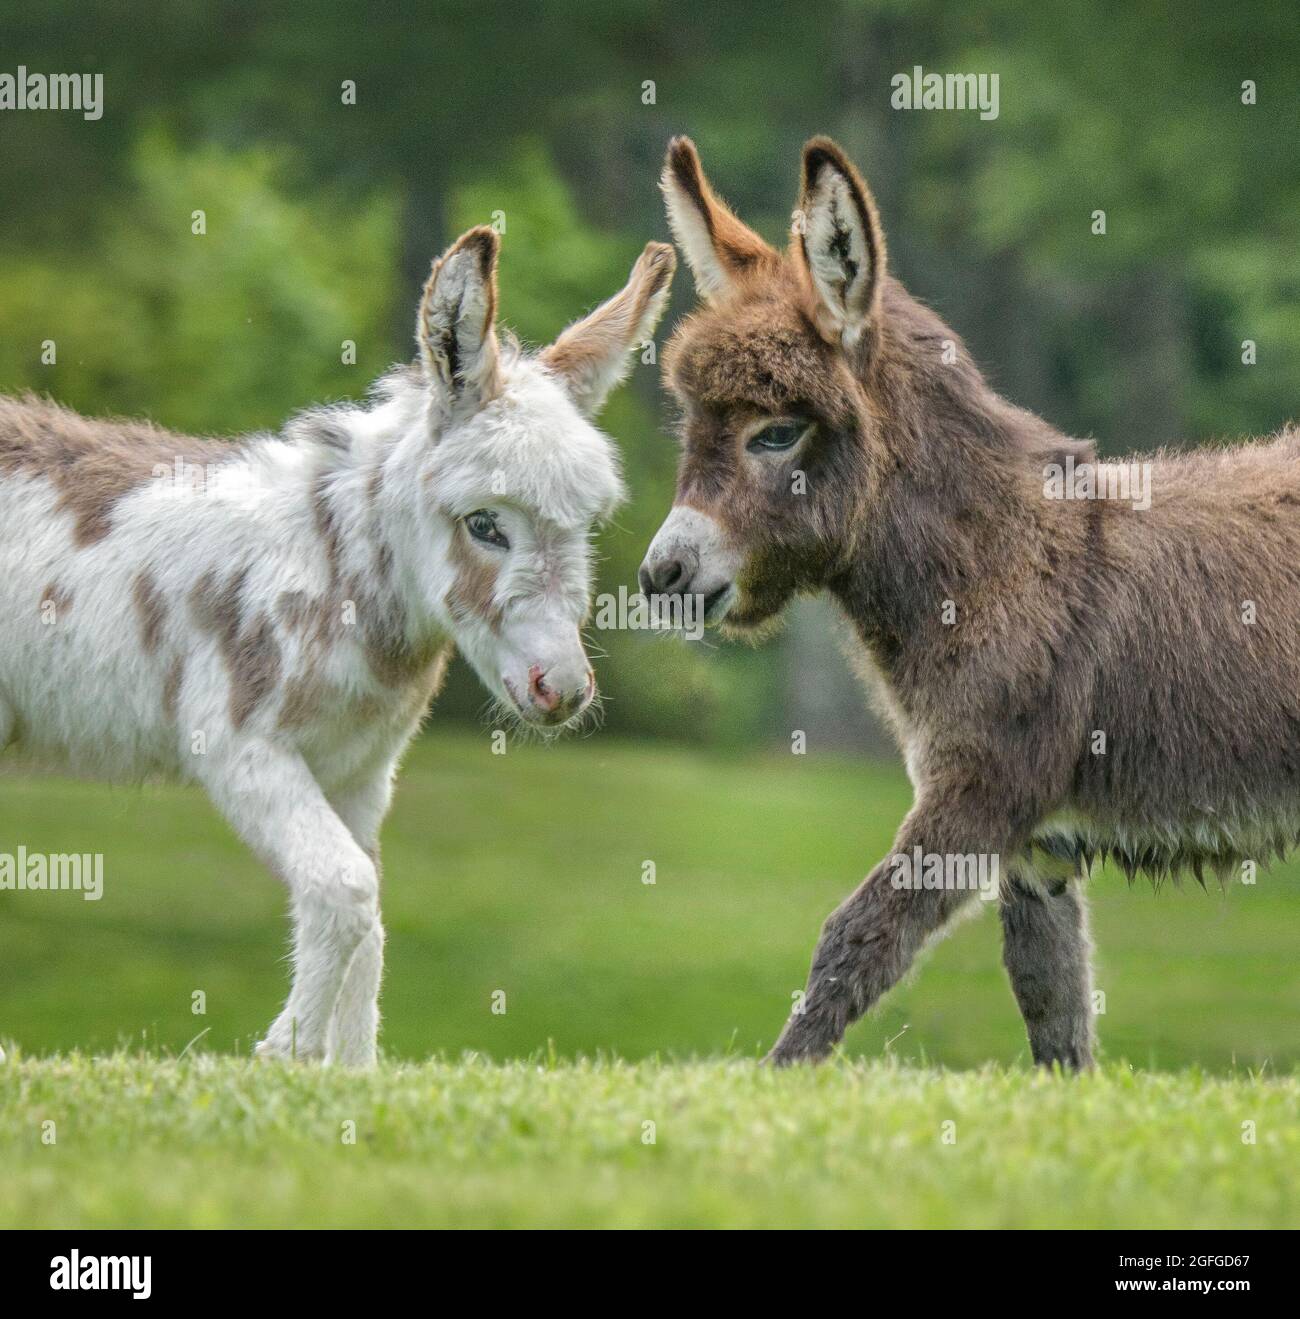 Two Miniature donkey foals on lush green lawn Stock Photo